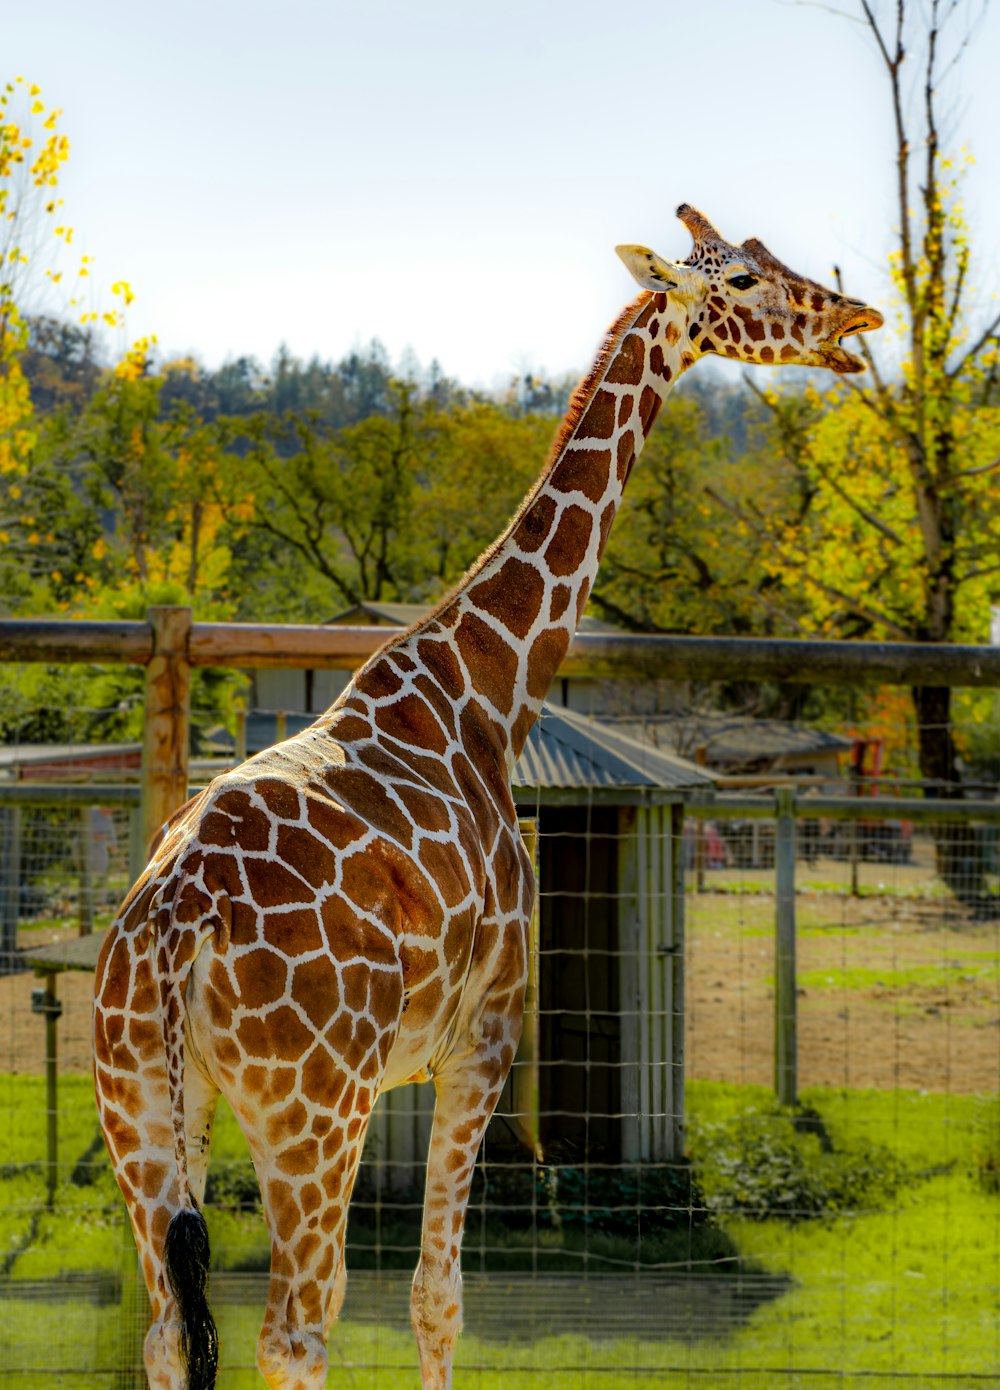 a giraffe standing in a fenced in area